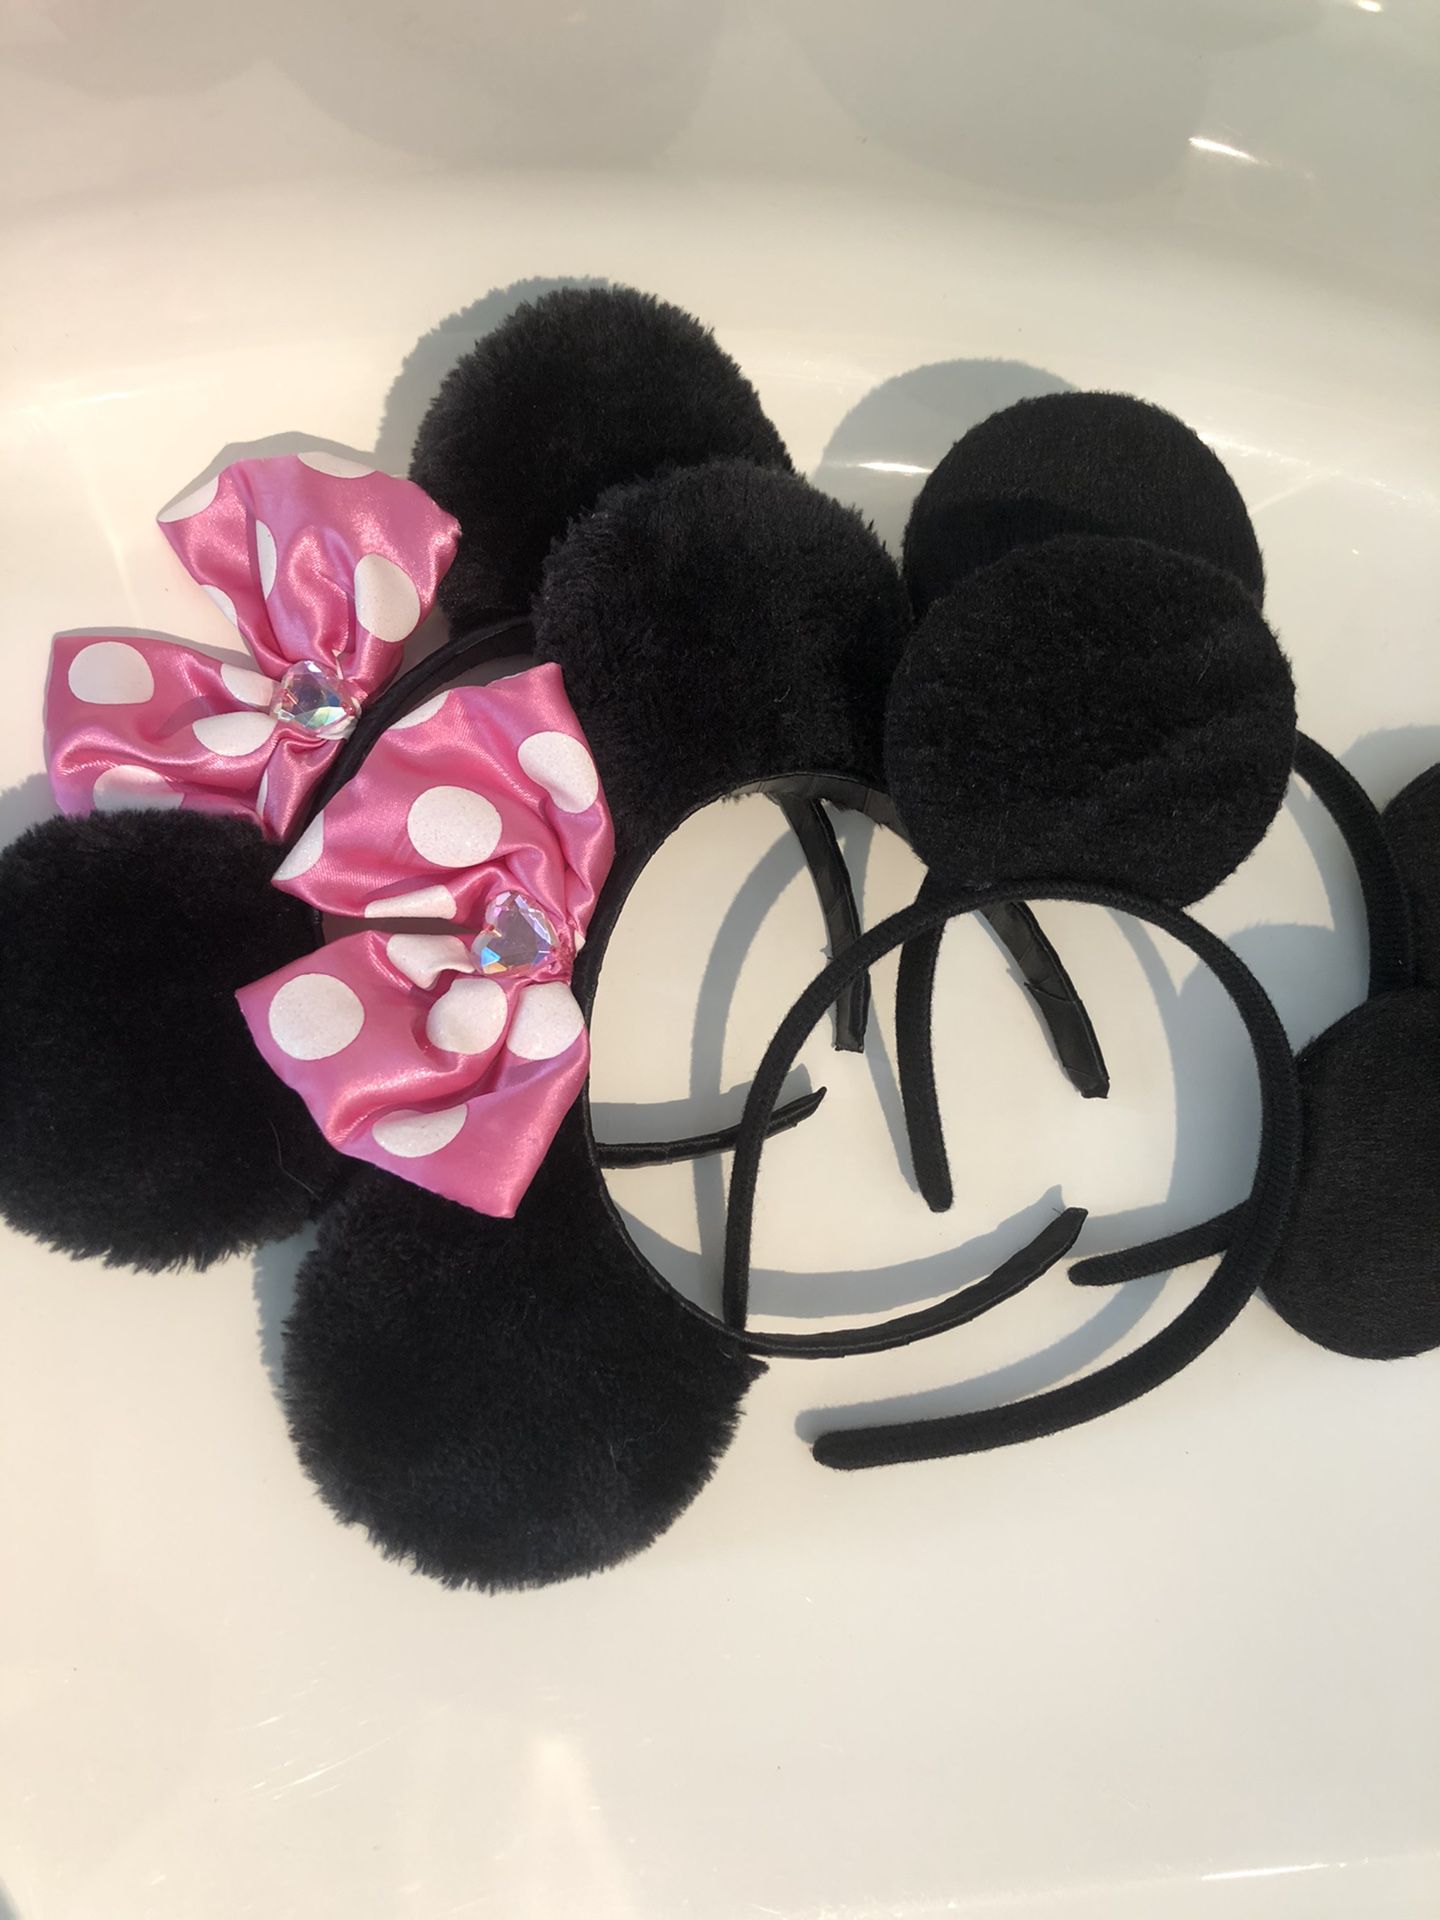 Mickey and Minnie mouse ears